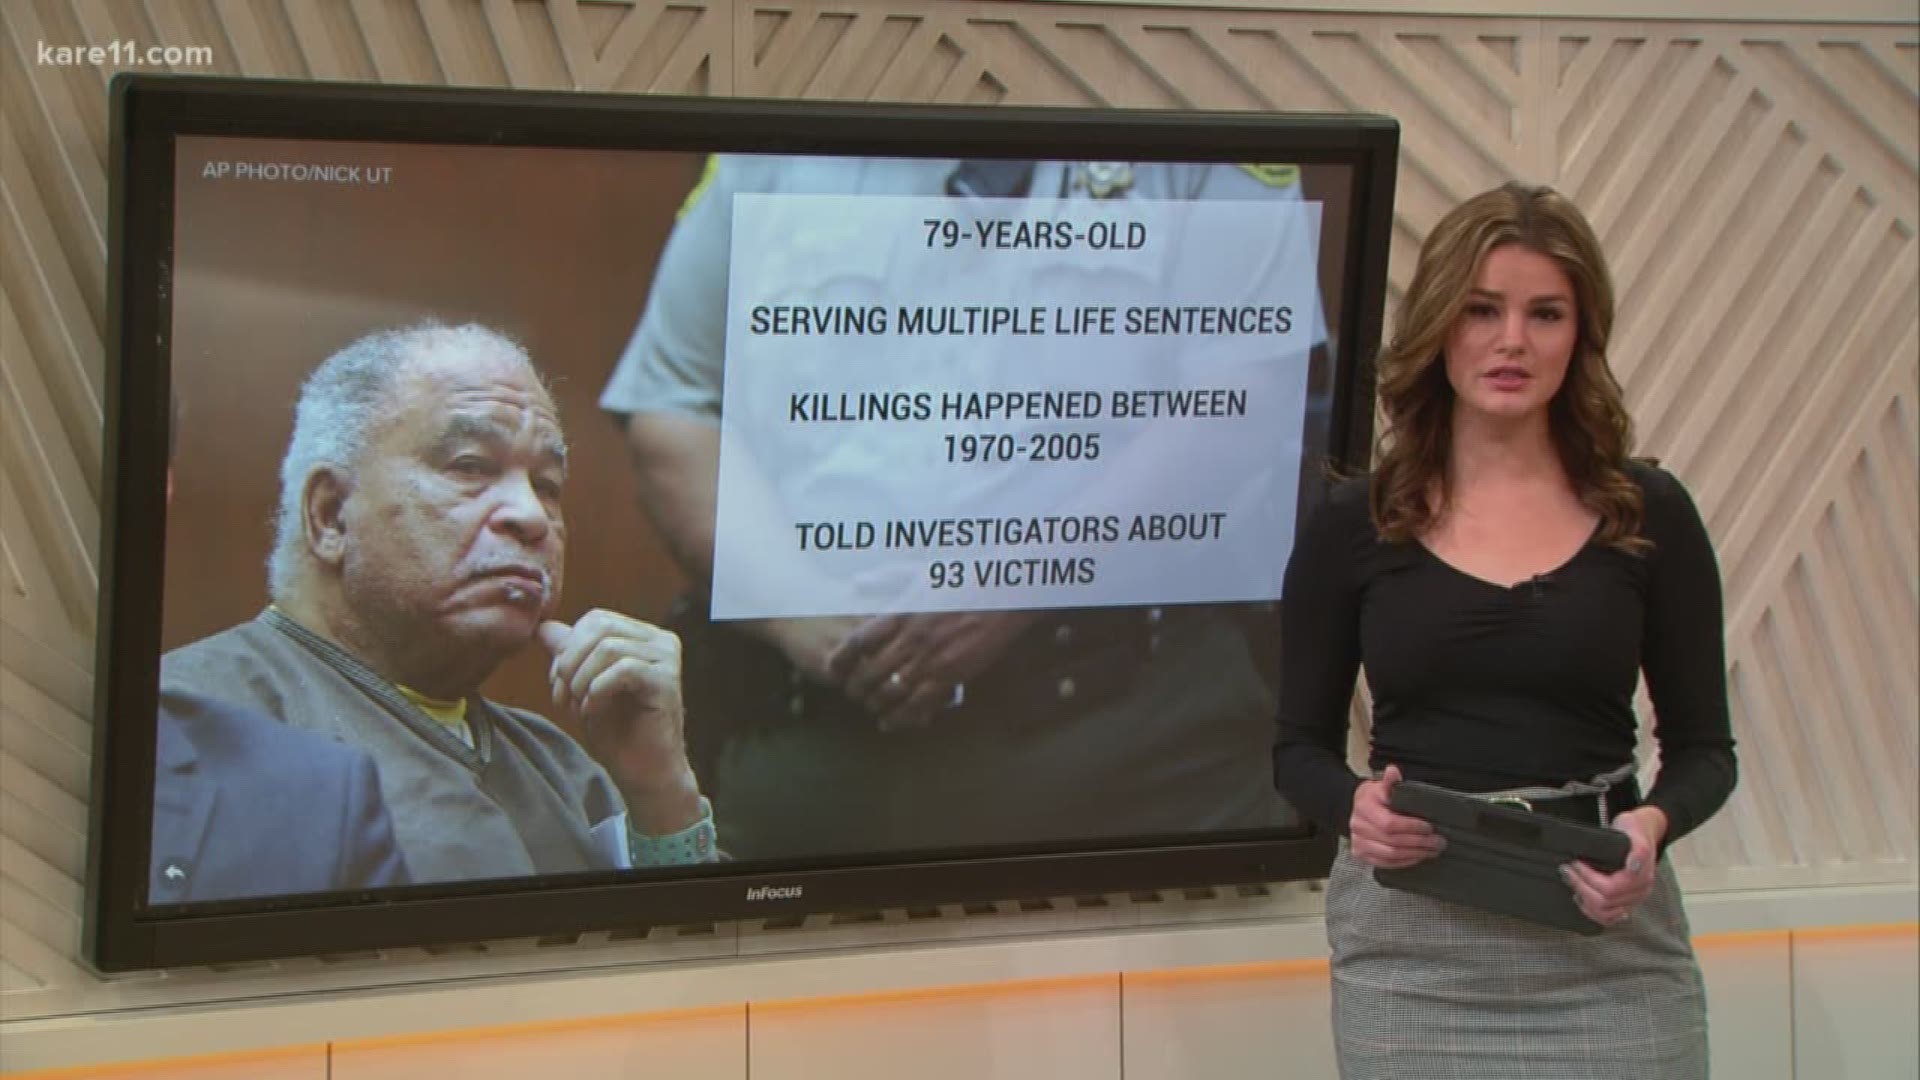 Of the 93 murders that 79-year-old Samuel Little has confessed to, officials have already been able to verify 50 so far. They believe each confession is credible.